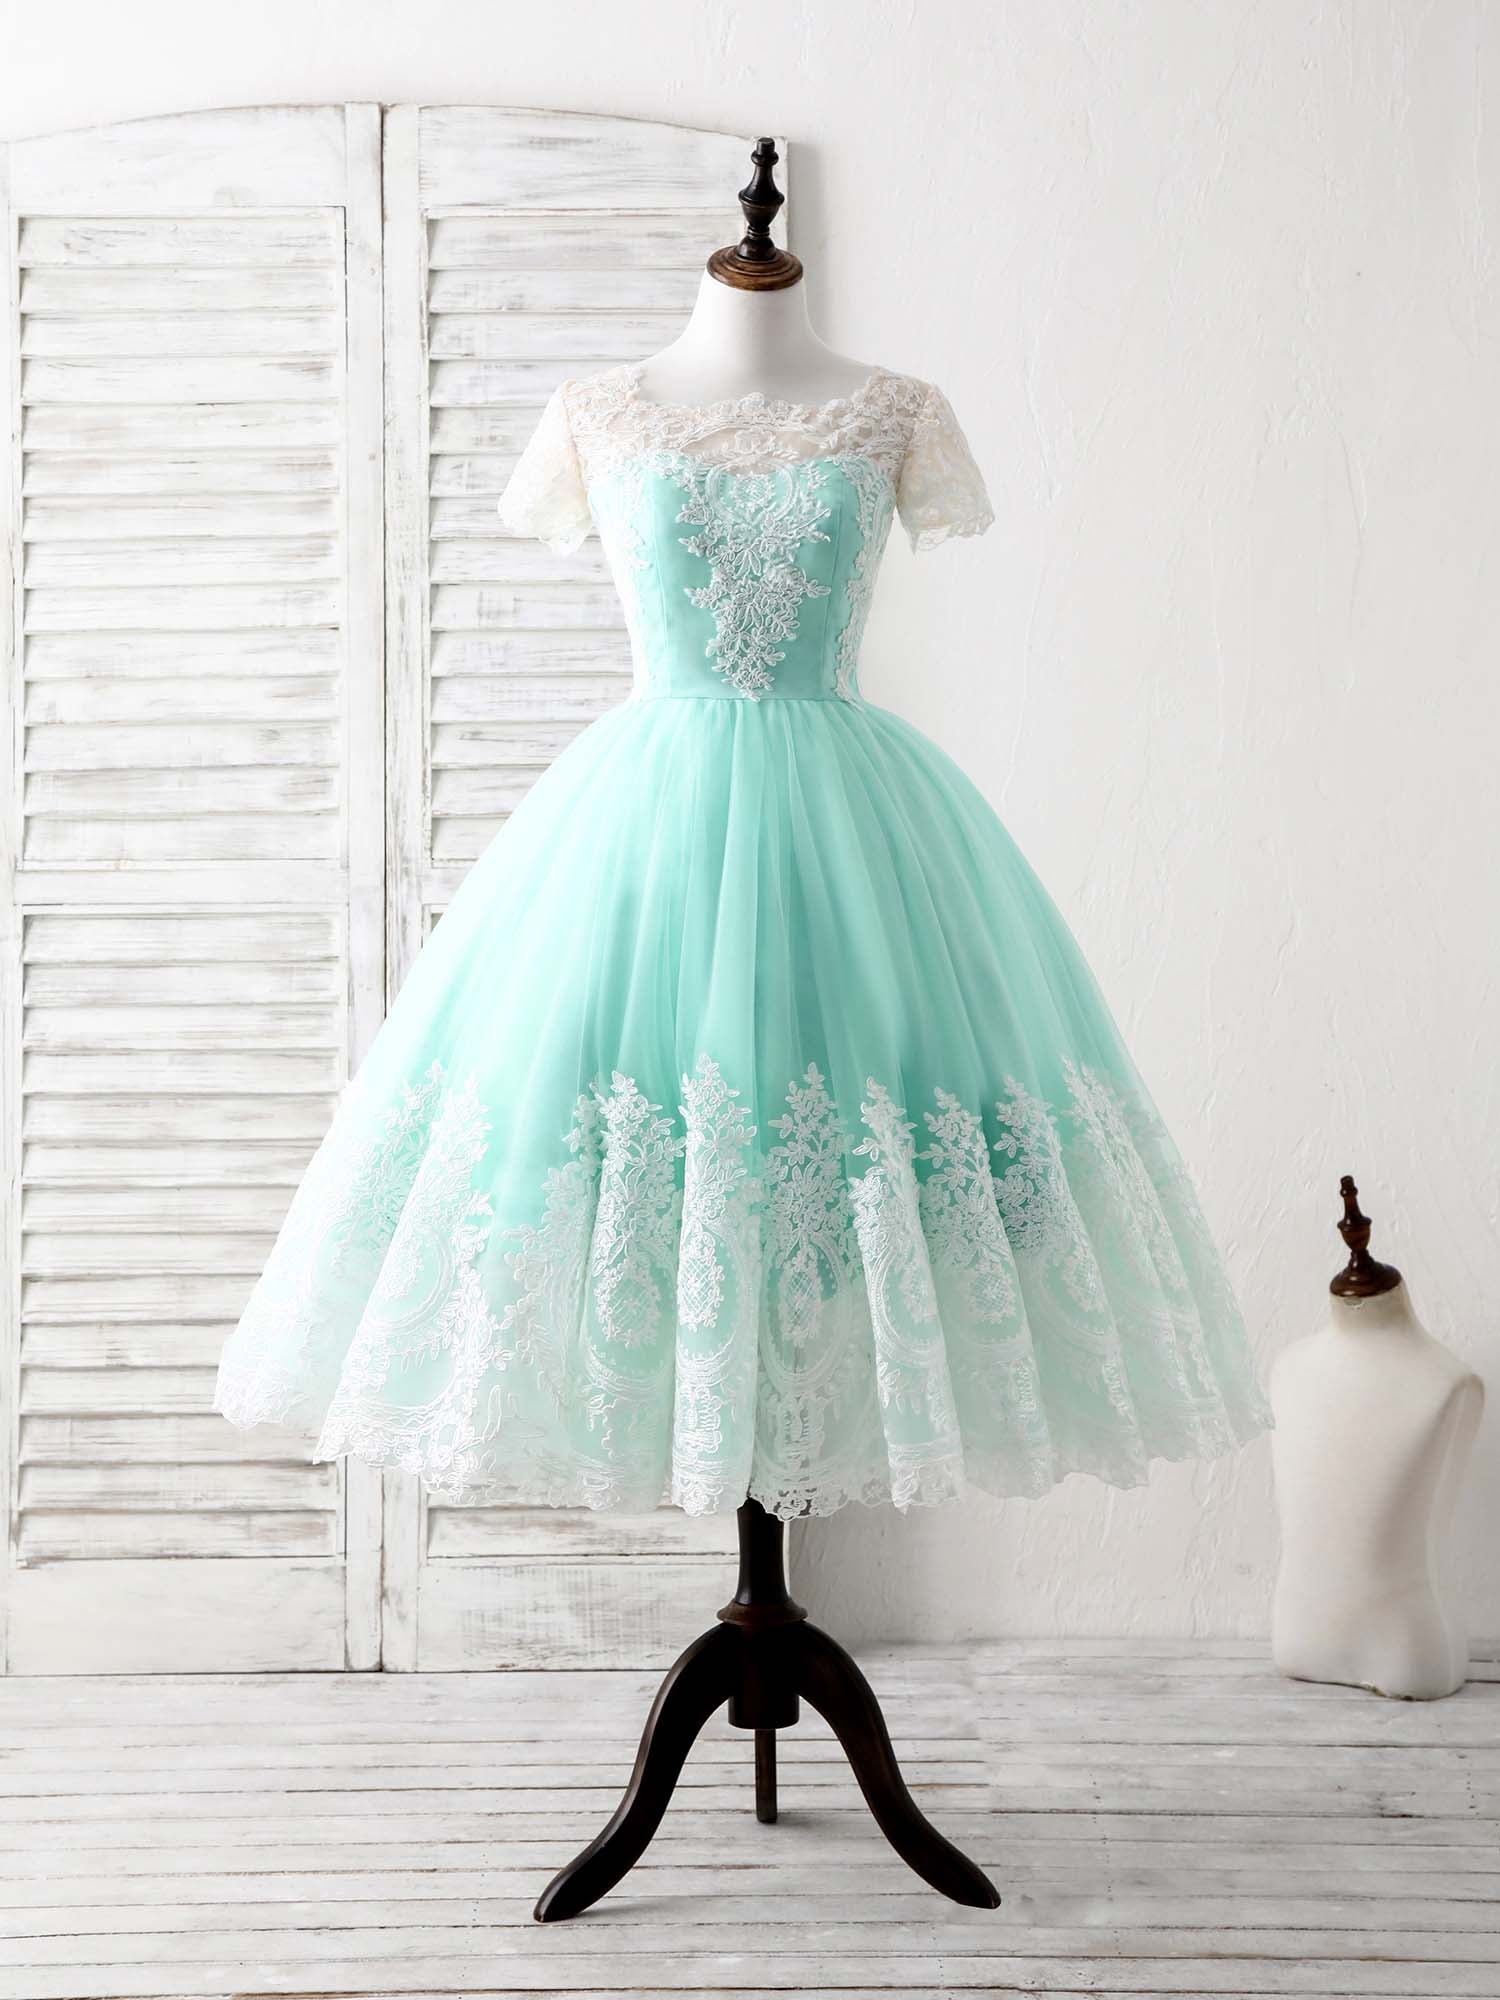 Green Round Neck Lace Applique Tulle Short Corset Prom Dresses outfit, Bridesmaid Dresses Mismatched Summer